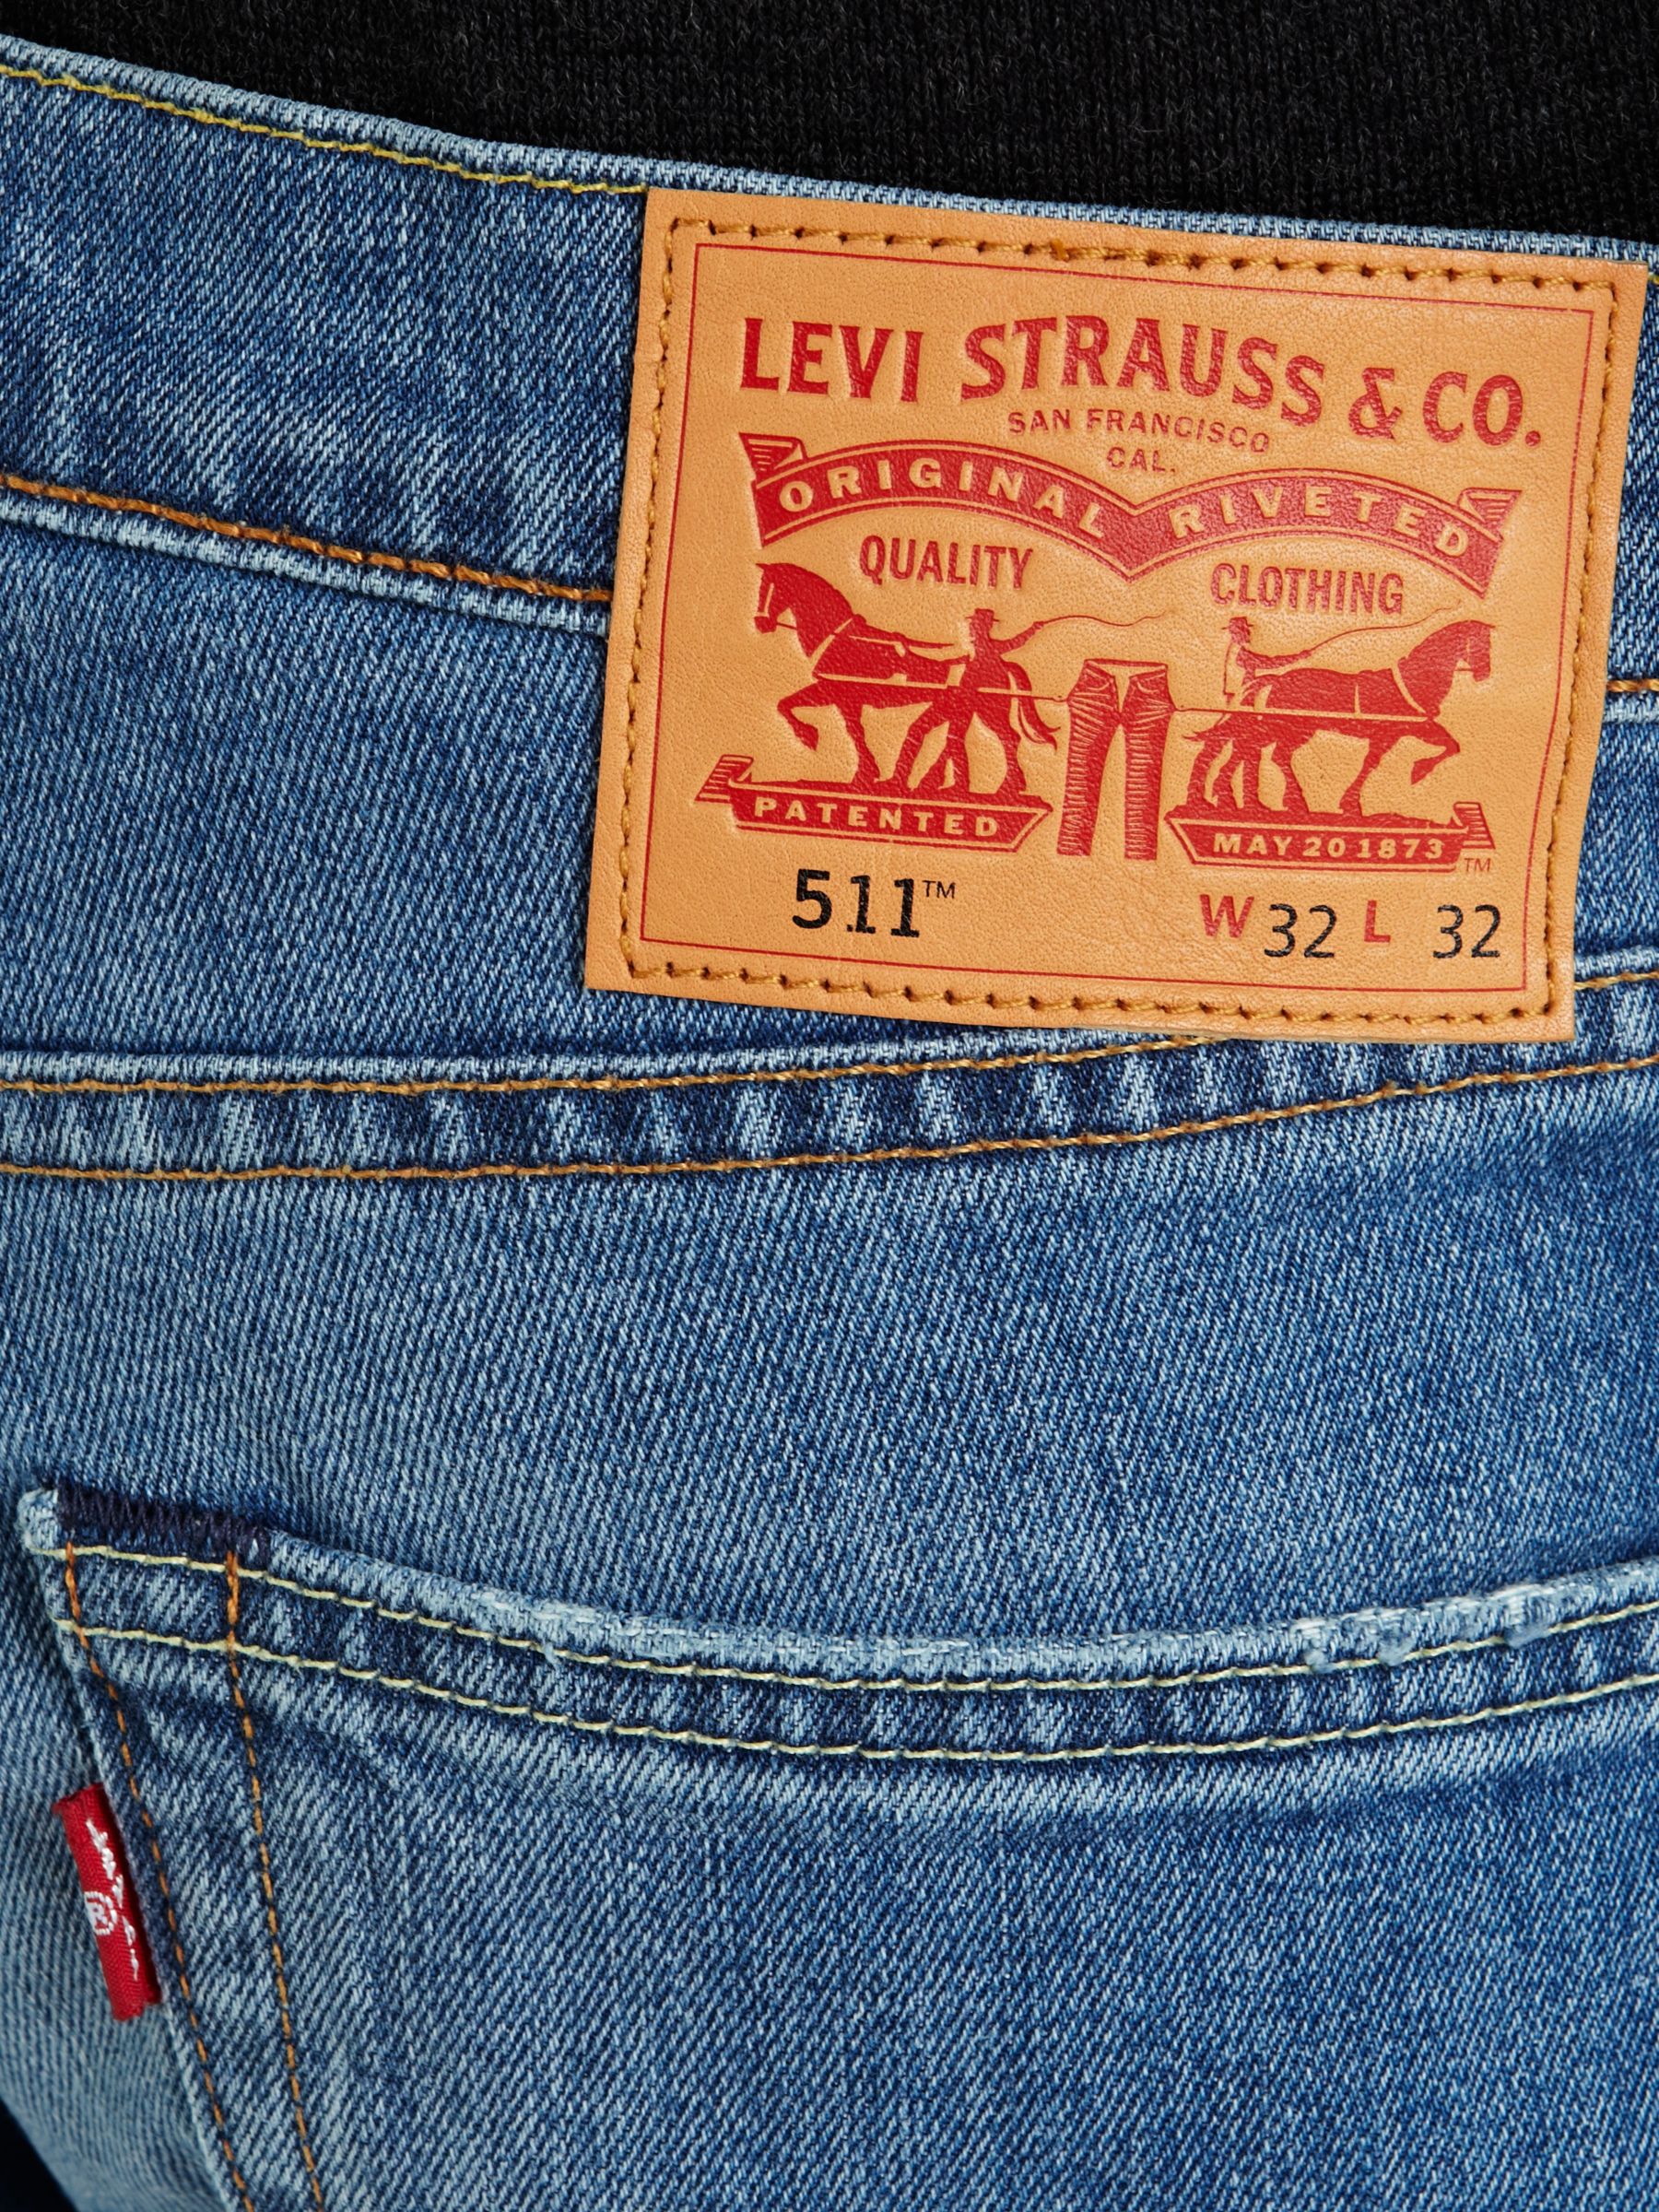 levis patented may 1873